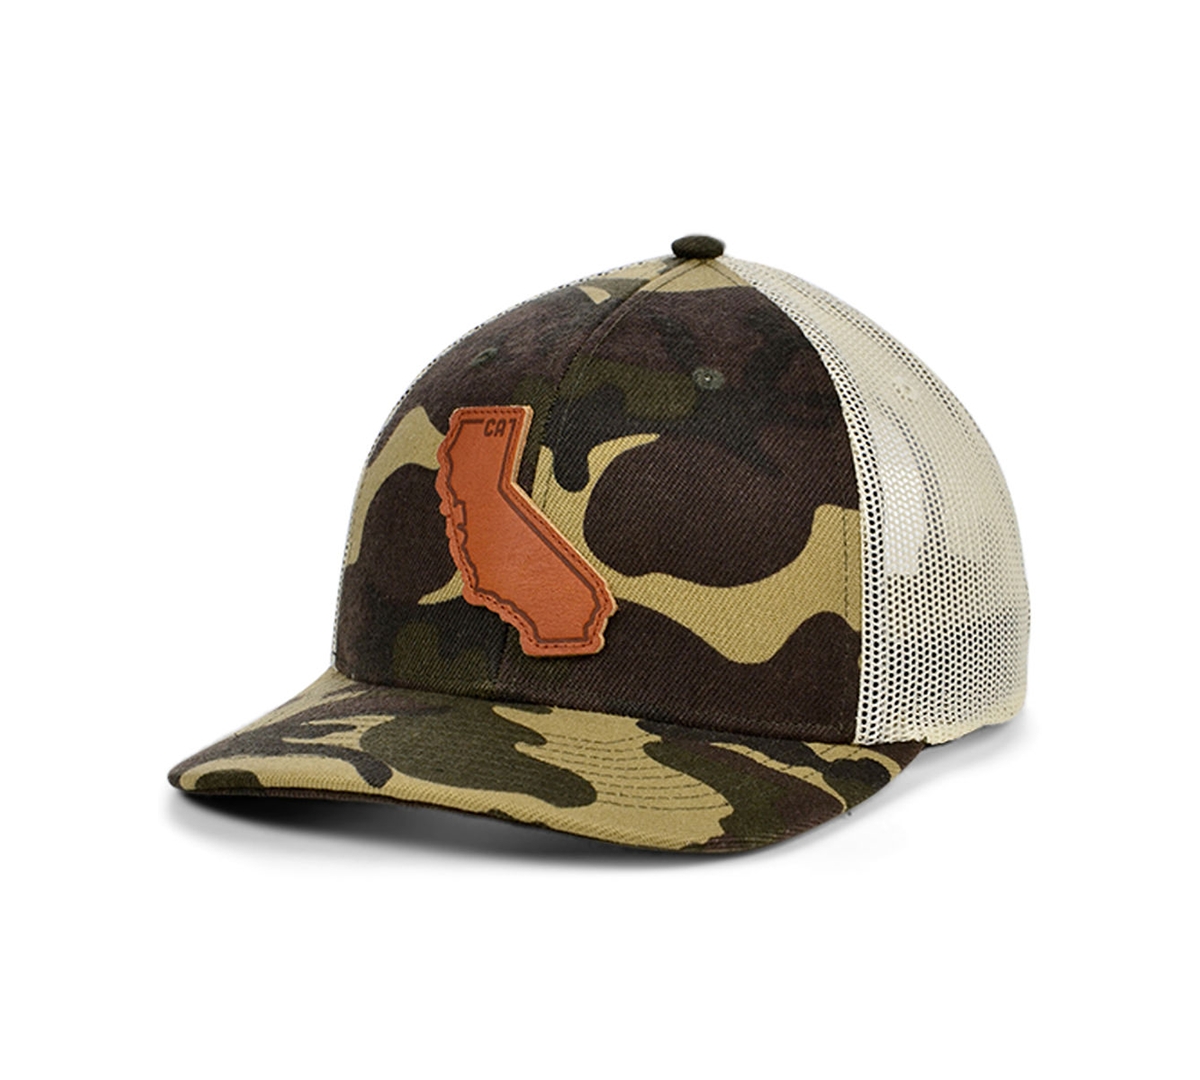 Local Crowns California Woodland State Patch Curved Trucker Cap - WoodlandCamo/Ivory/Brown